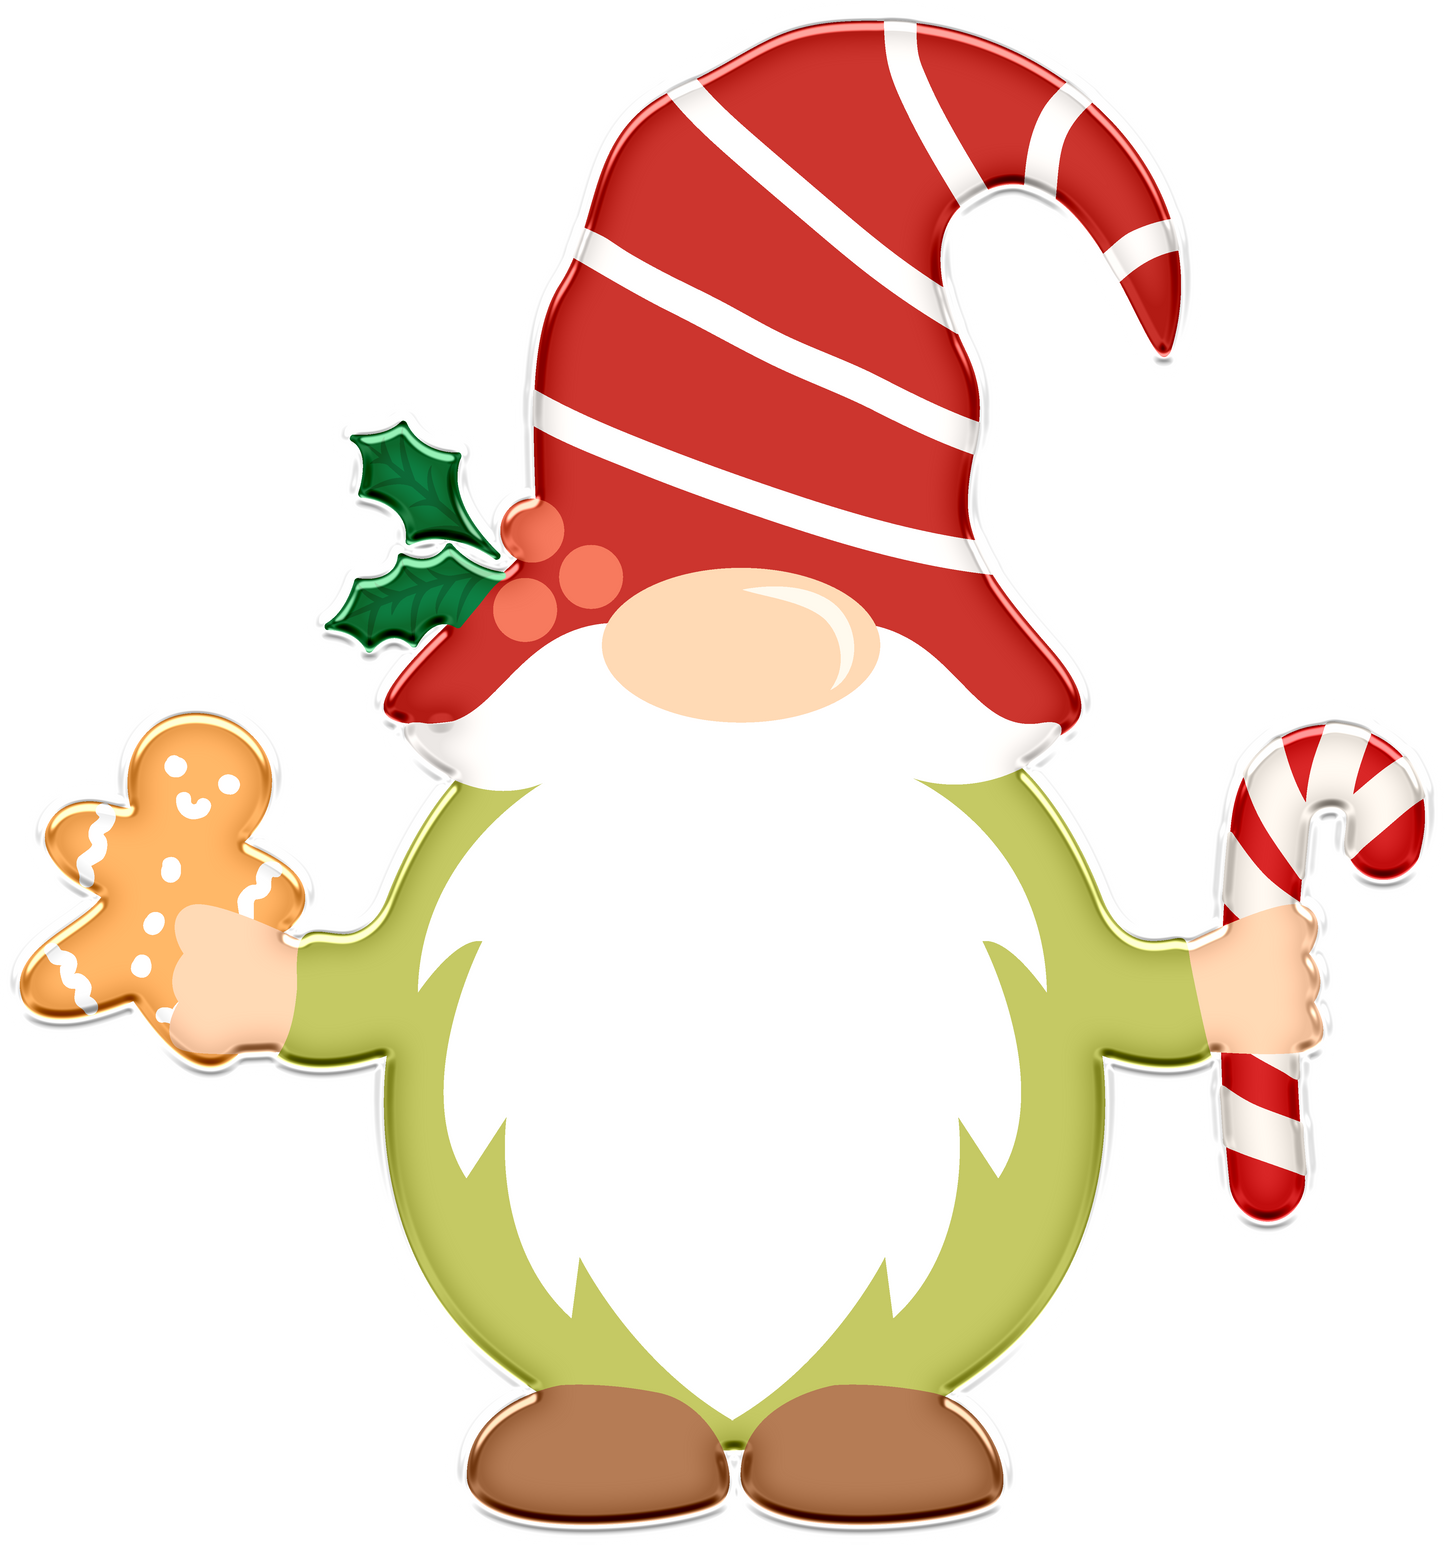 Stickers - Christmas Gnome with Candy Cane and Cookie Sticker, Christmas Stickers